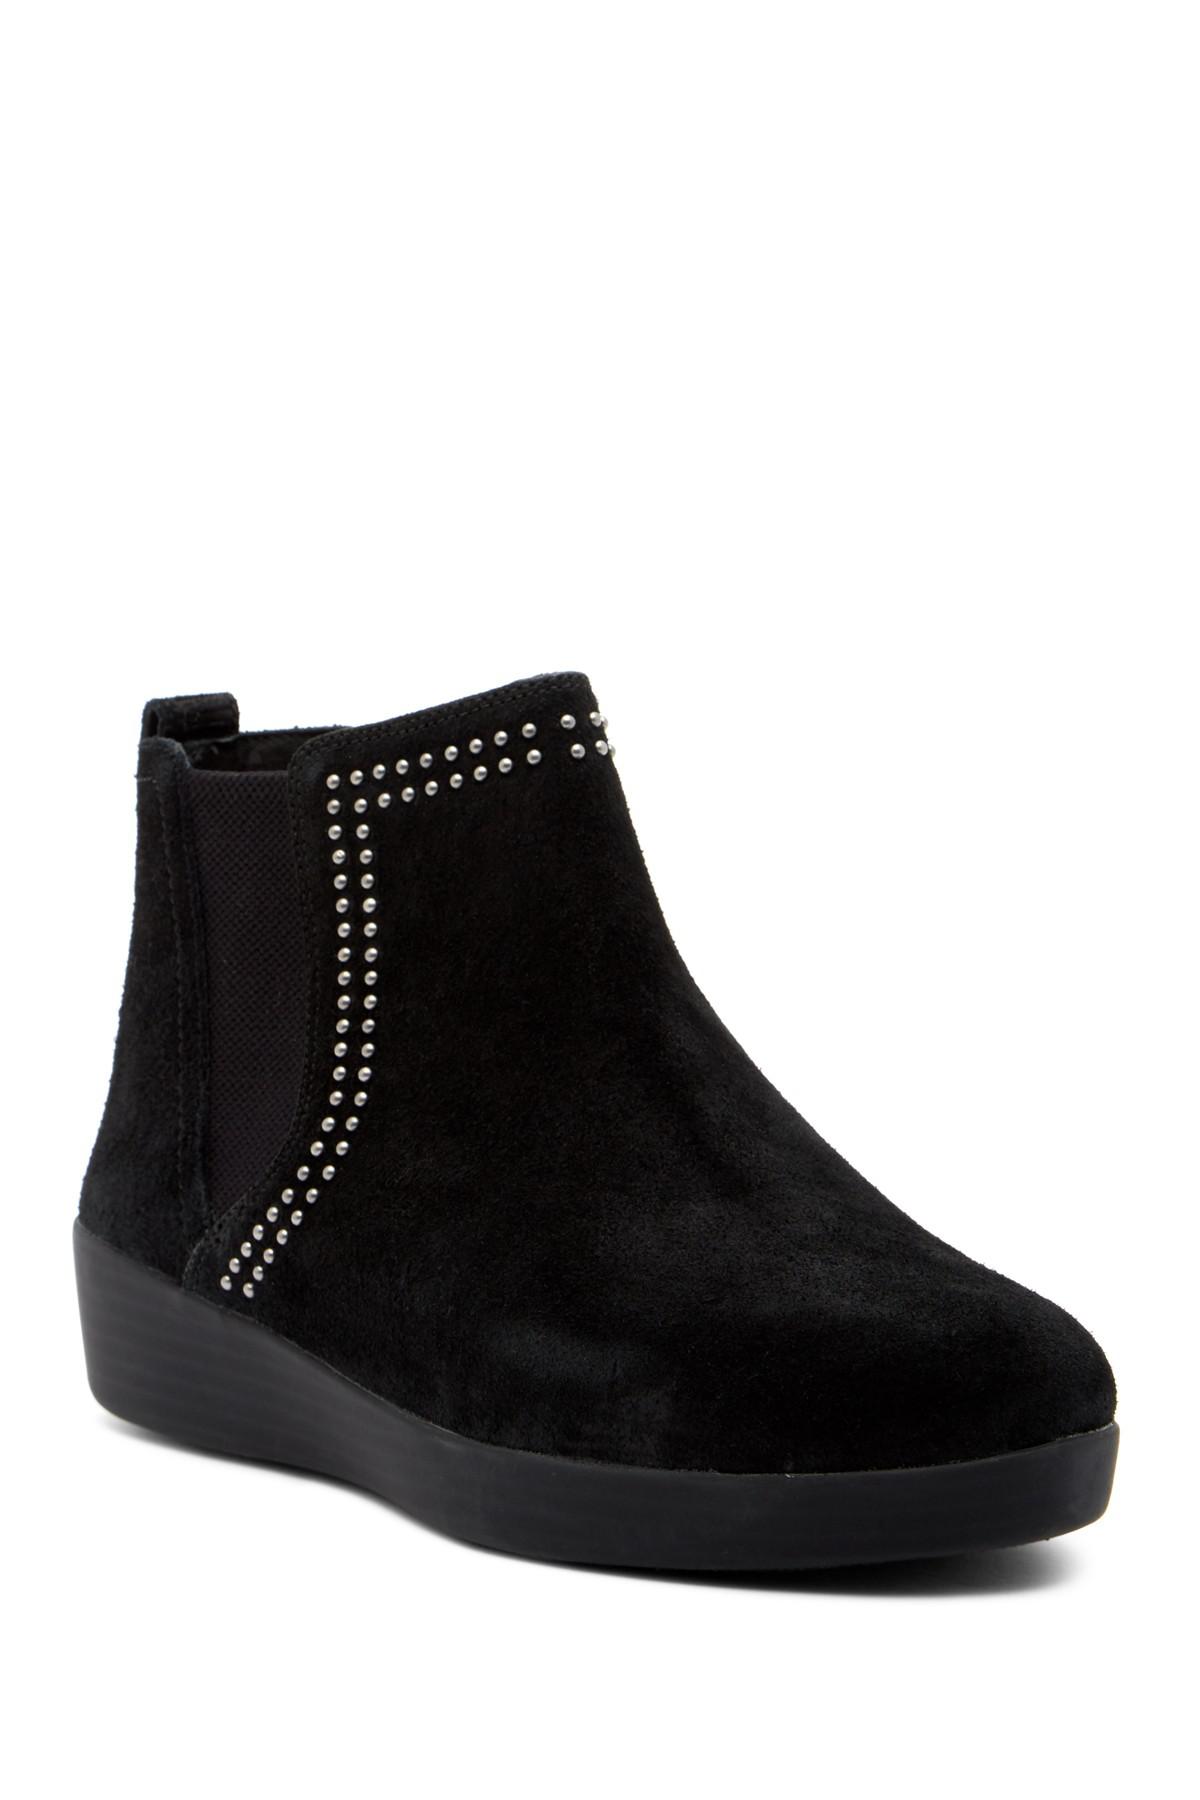 Fitflop Studded Suede Super Chelsea Boot in Black | Lyst